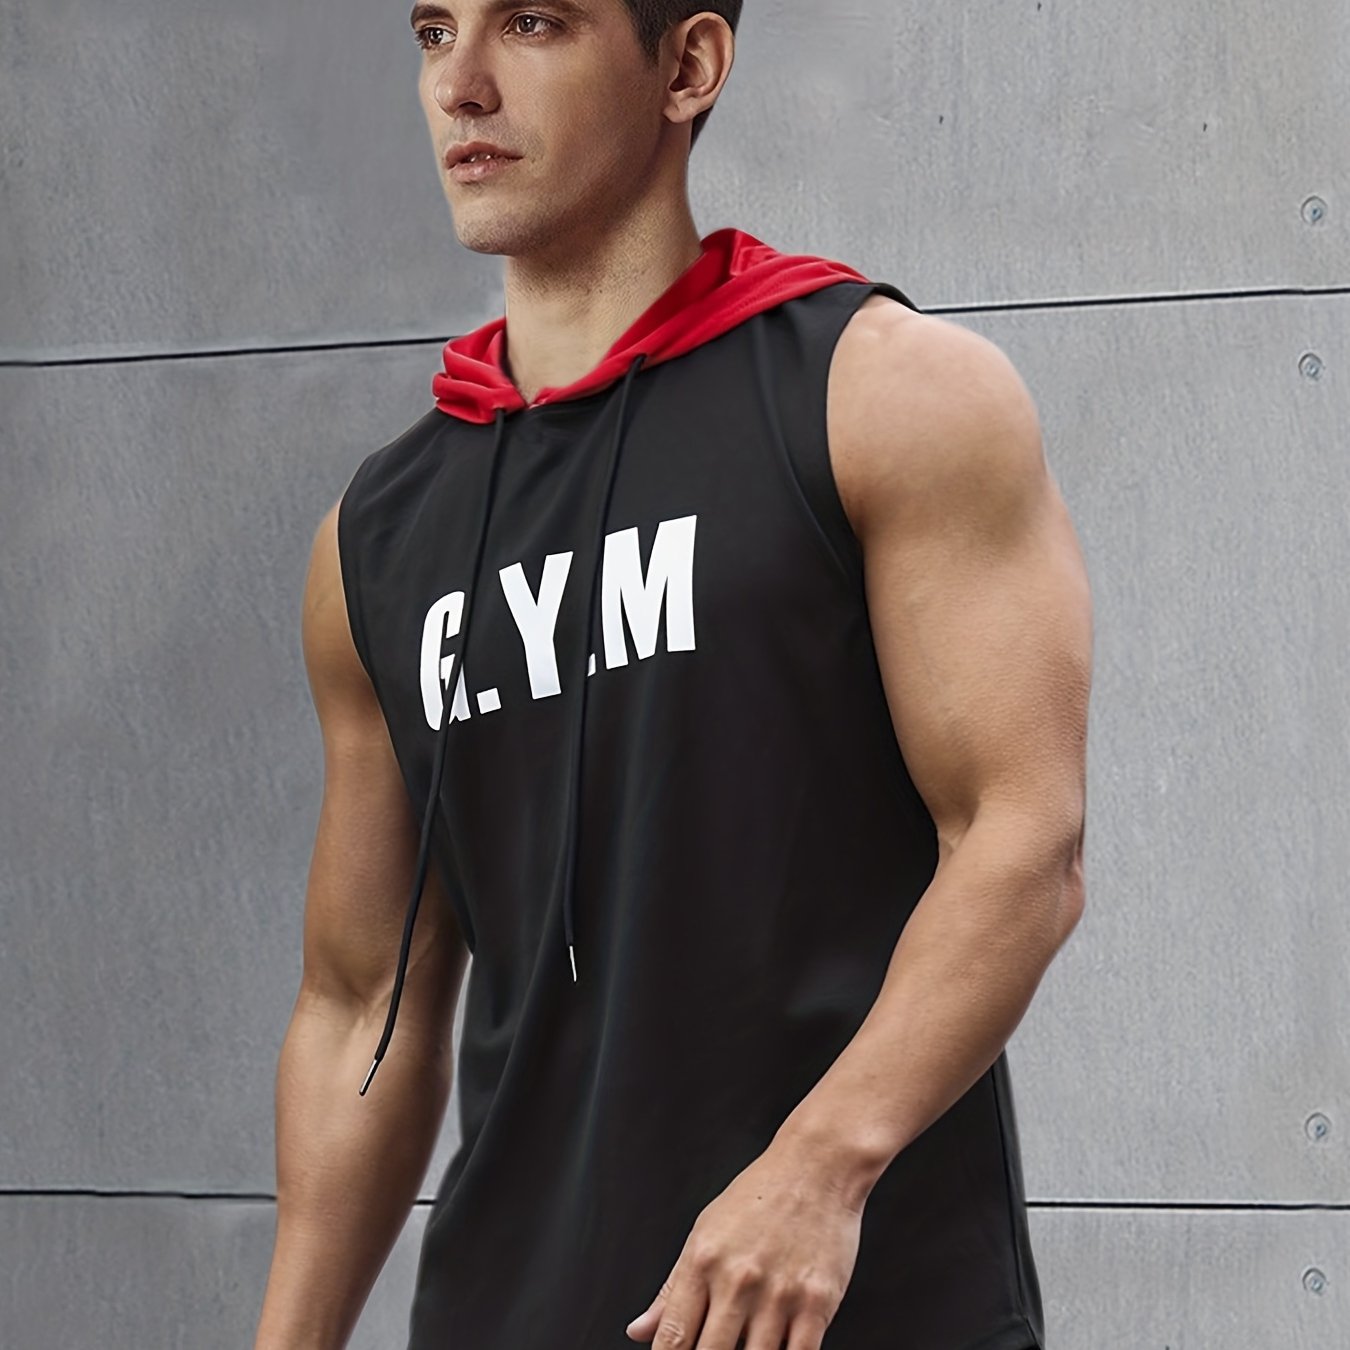 GYM Print, Men's Graphic Design Hooded Tank Top, Casual Comfy Vest For Summer Workout Gym Fitness Men's Clothing Top